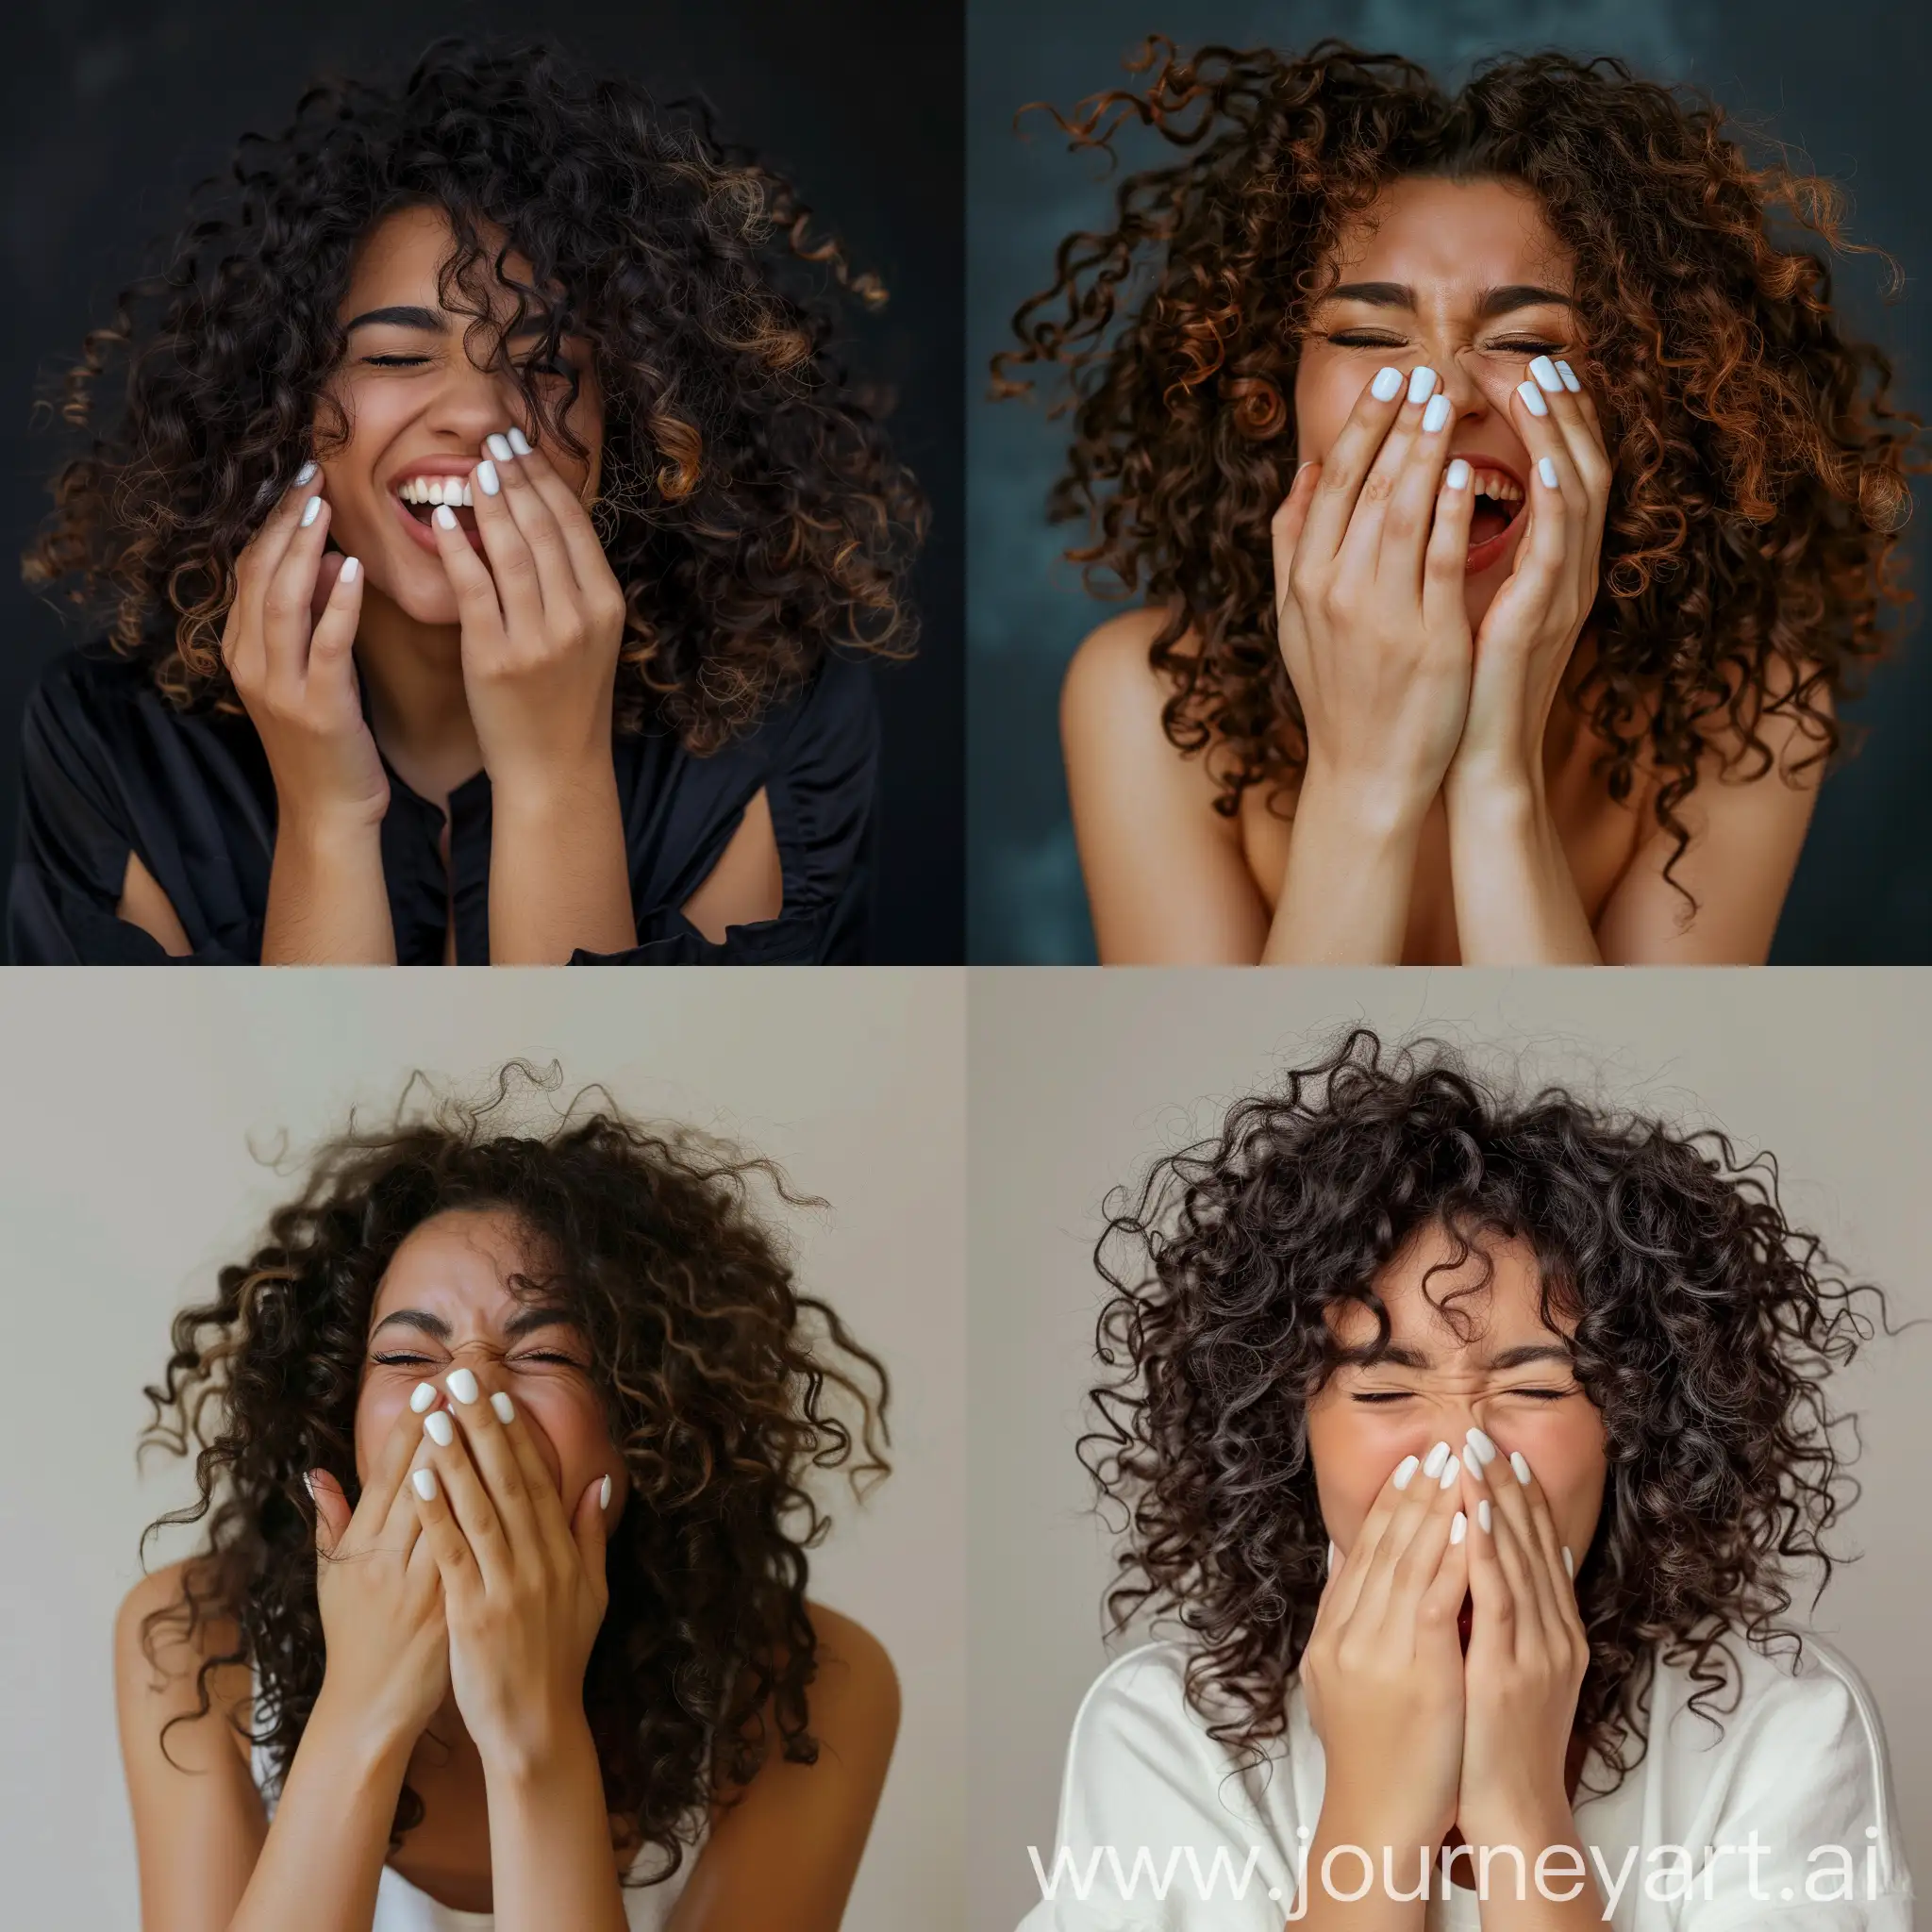 Joyful-Curly-Haired-Woman-with-White-Gel-Nail-Polish-Laughing